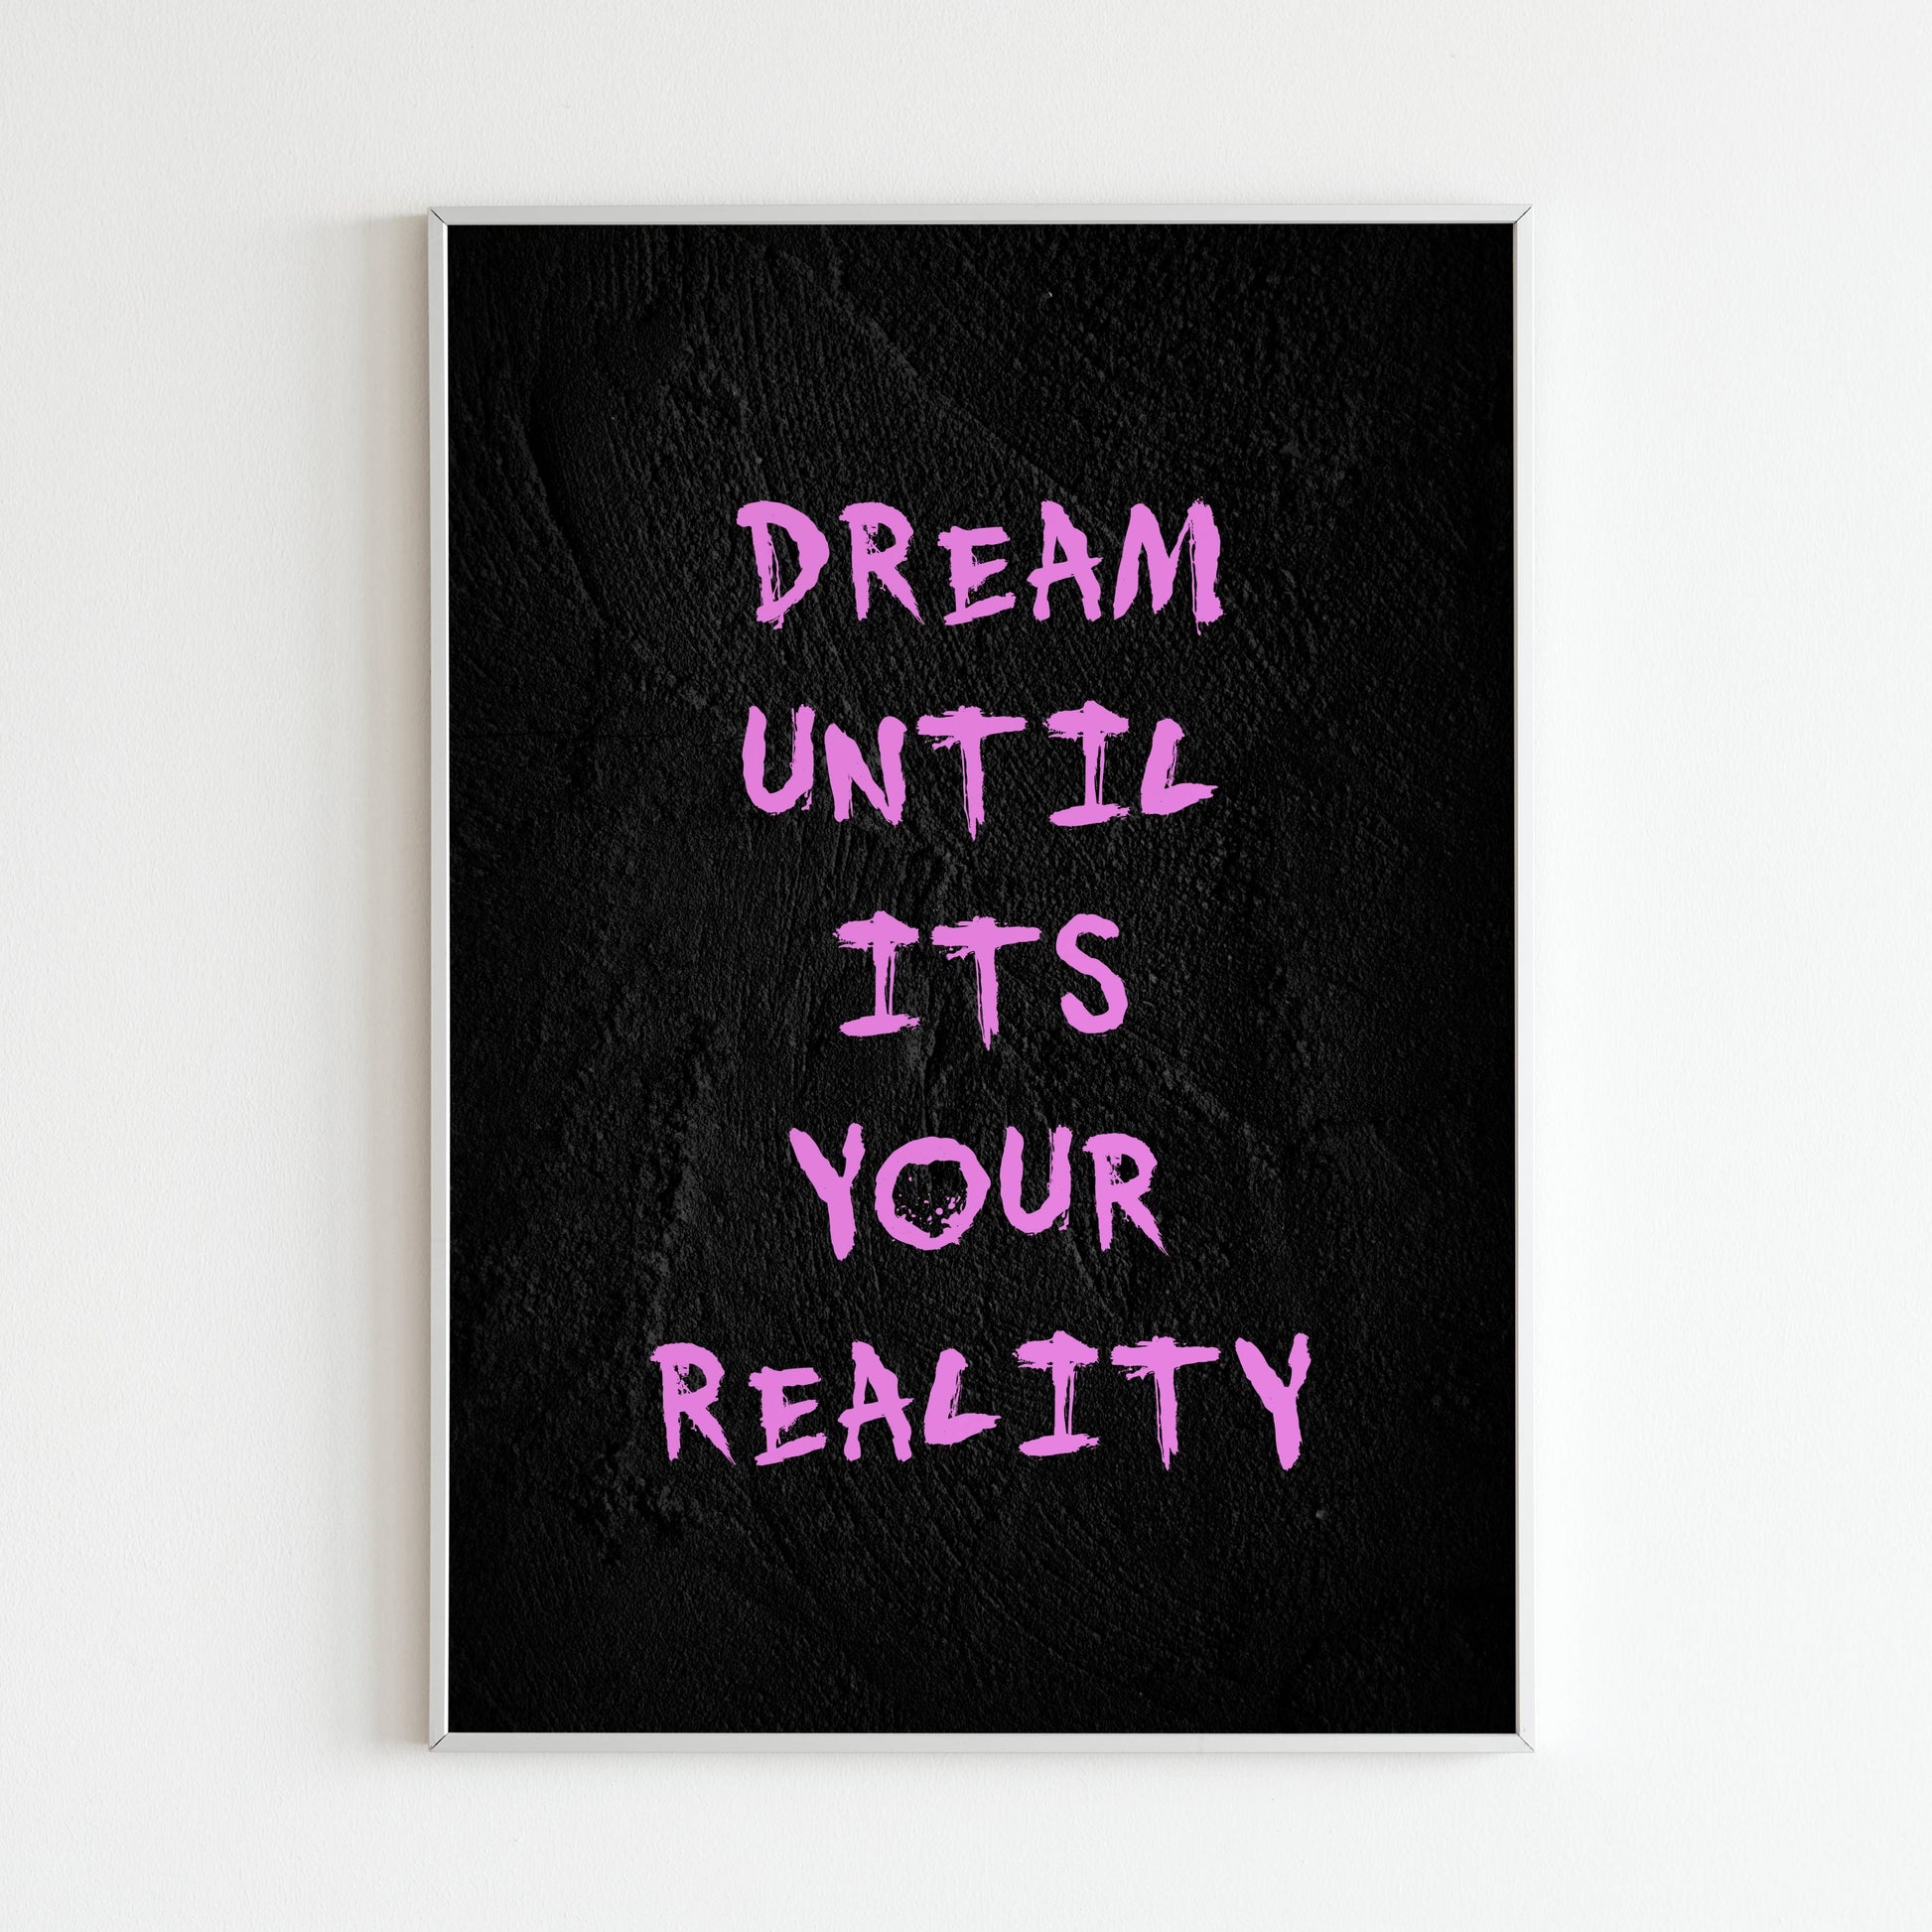 Downloadable "Dream Until It's Your Reality" wall art for the power of pursuing dreams.